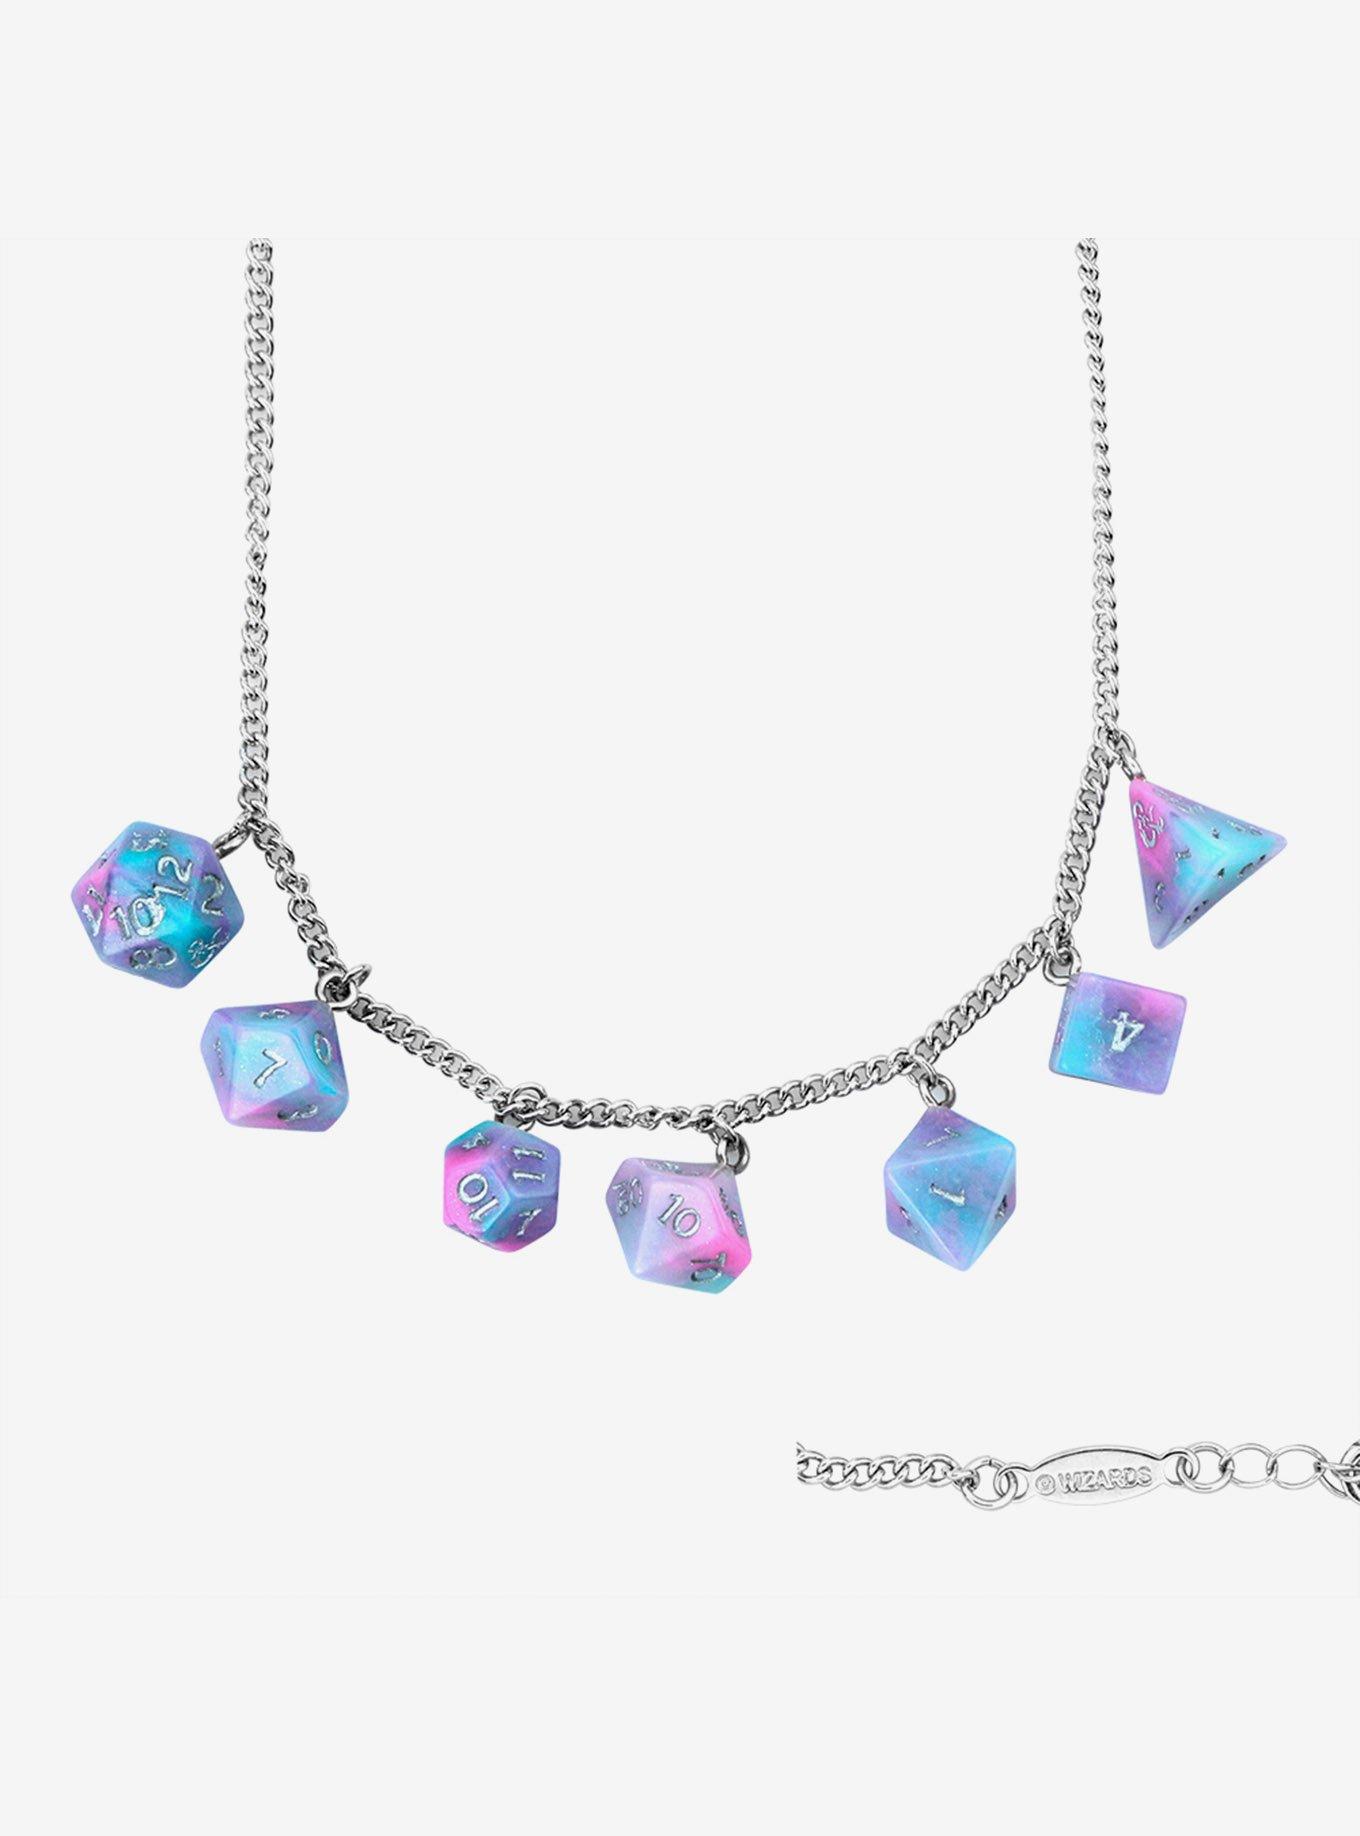 Dungeon & Dragons Necklaces